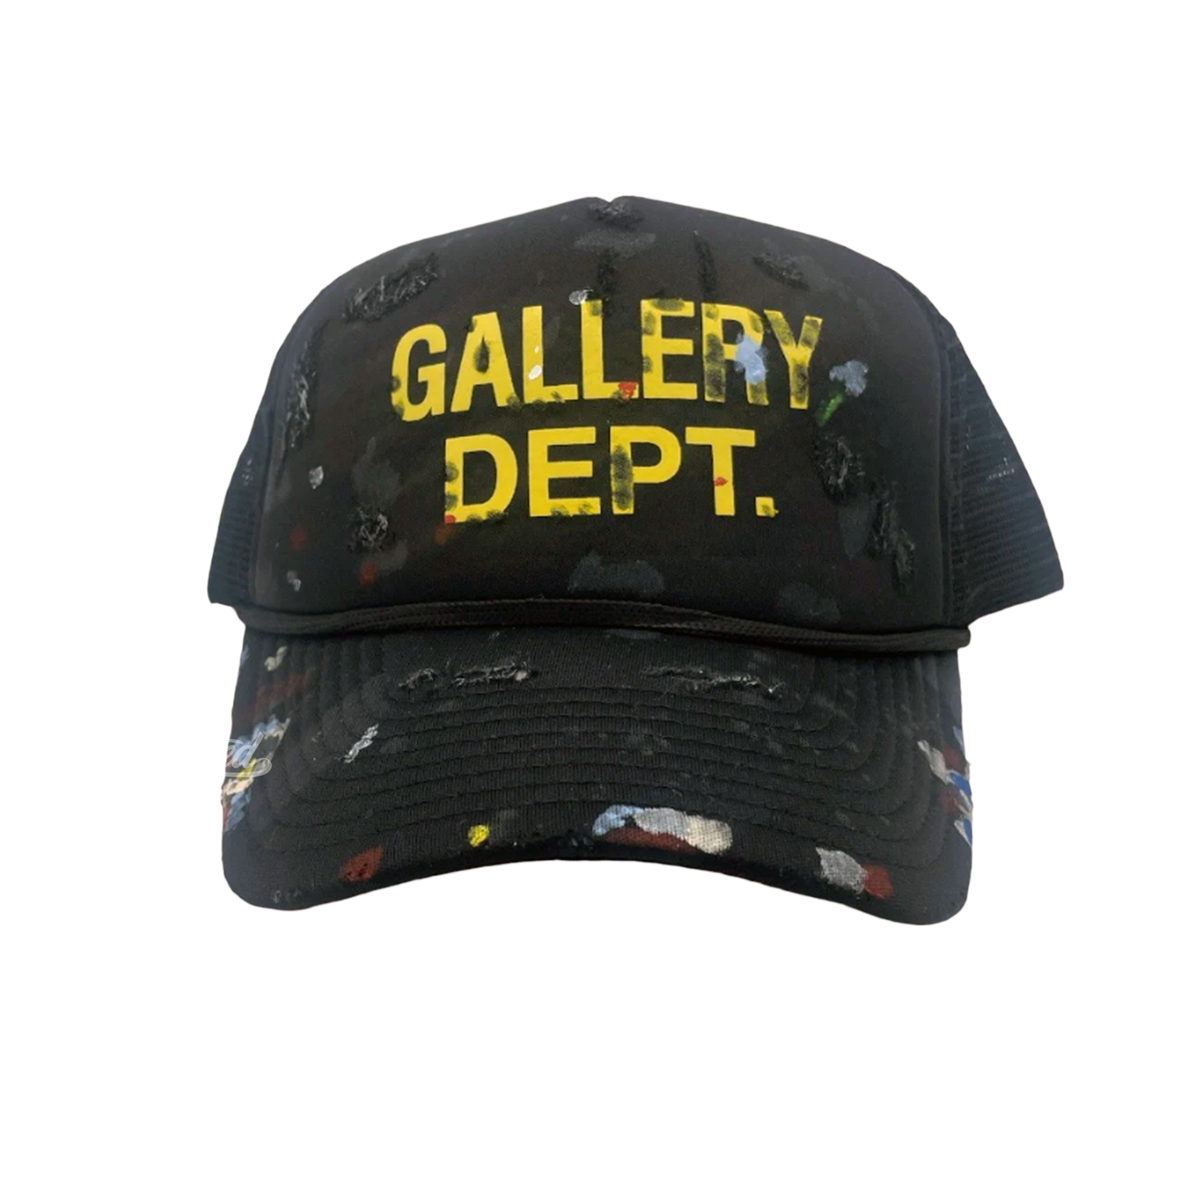 Gallery Dept. Painted And Distressed Trucker Hat "Black"